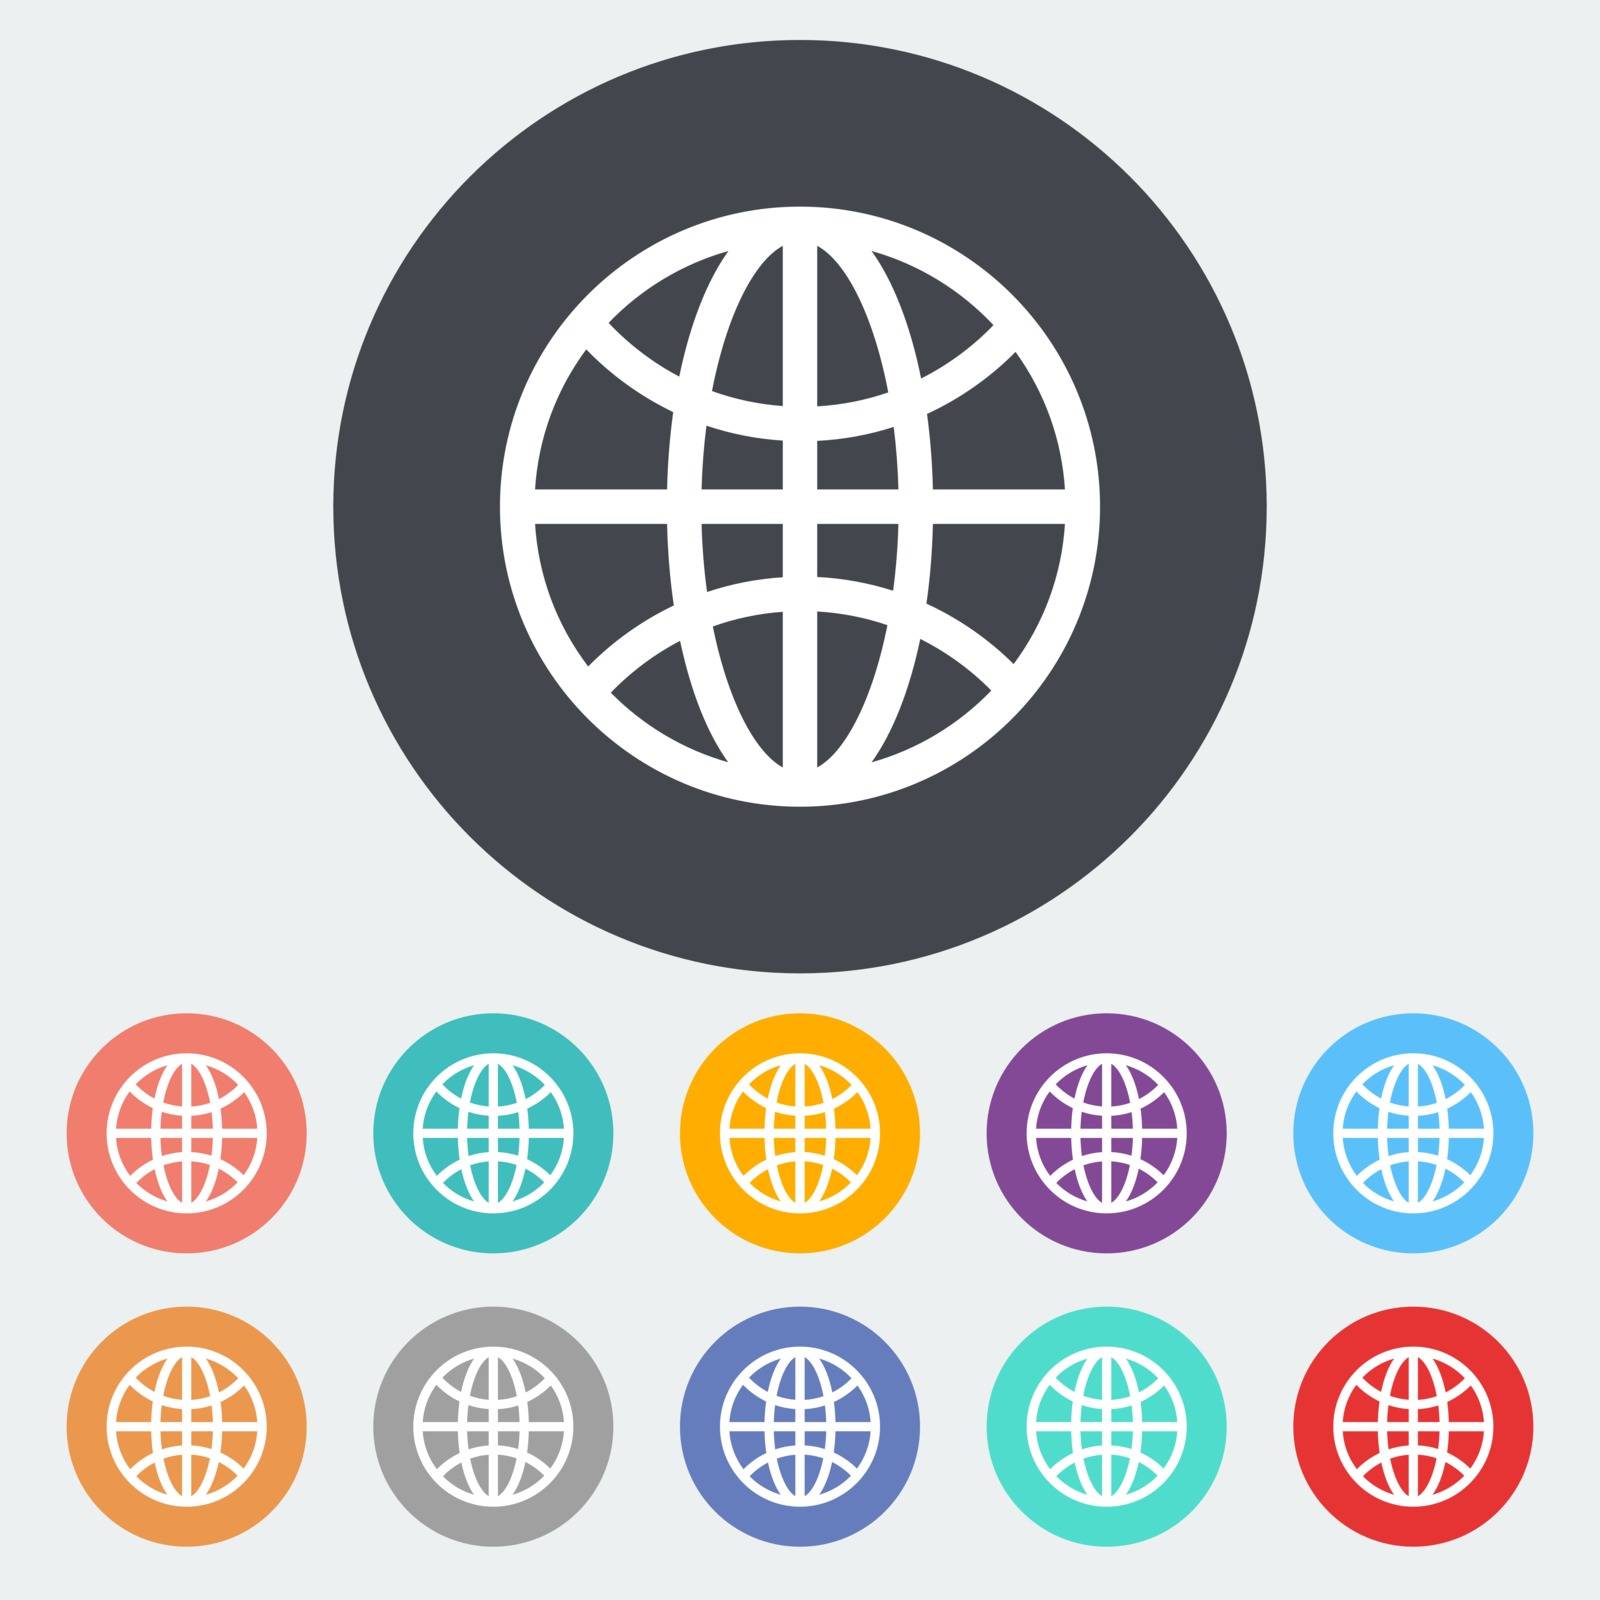 Earth. Single flat icon on the circle. Vector illustration.